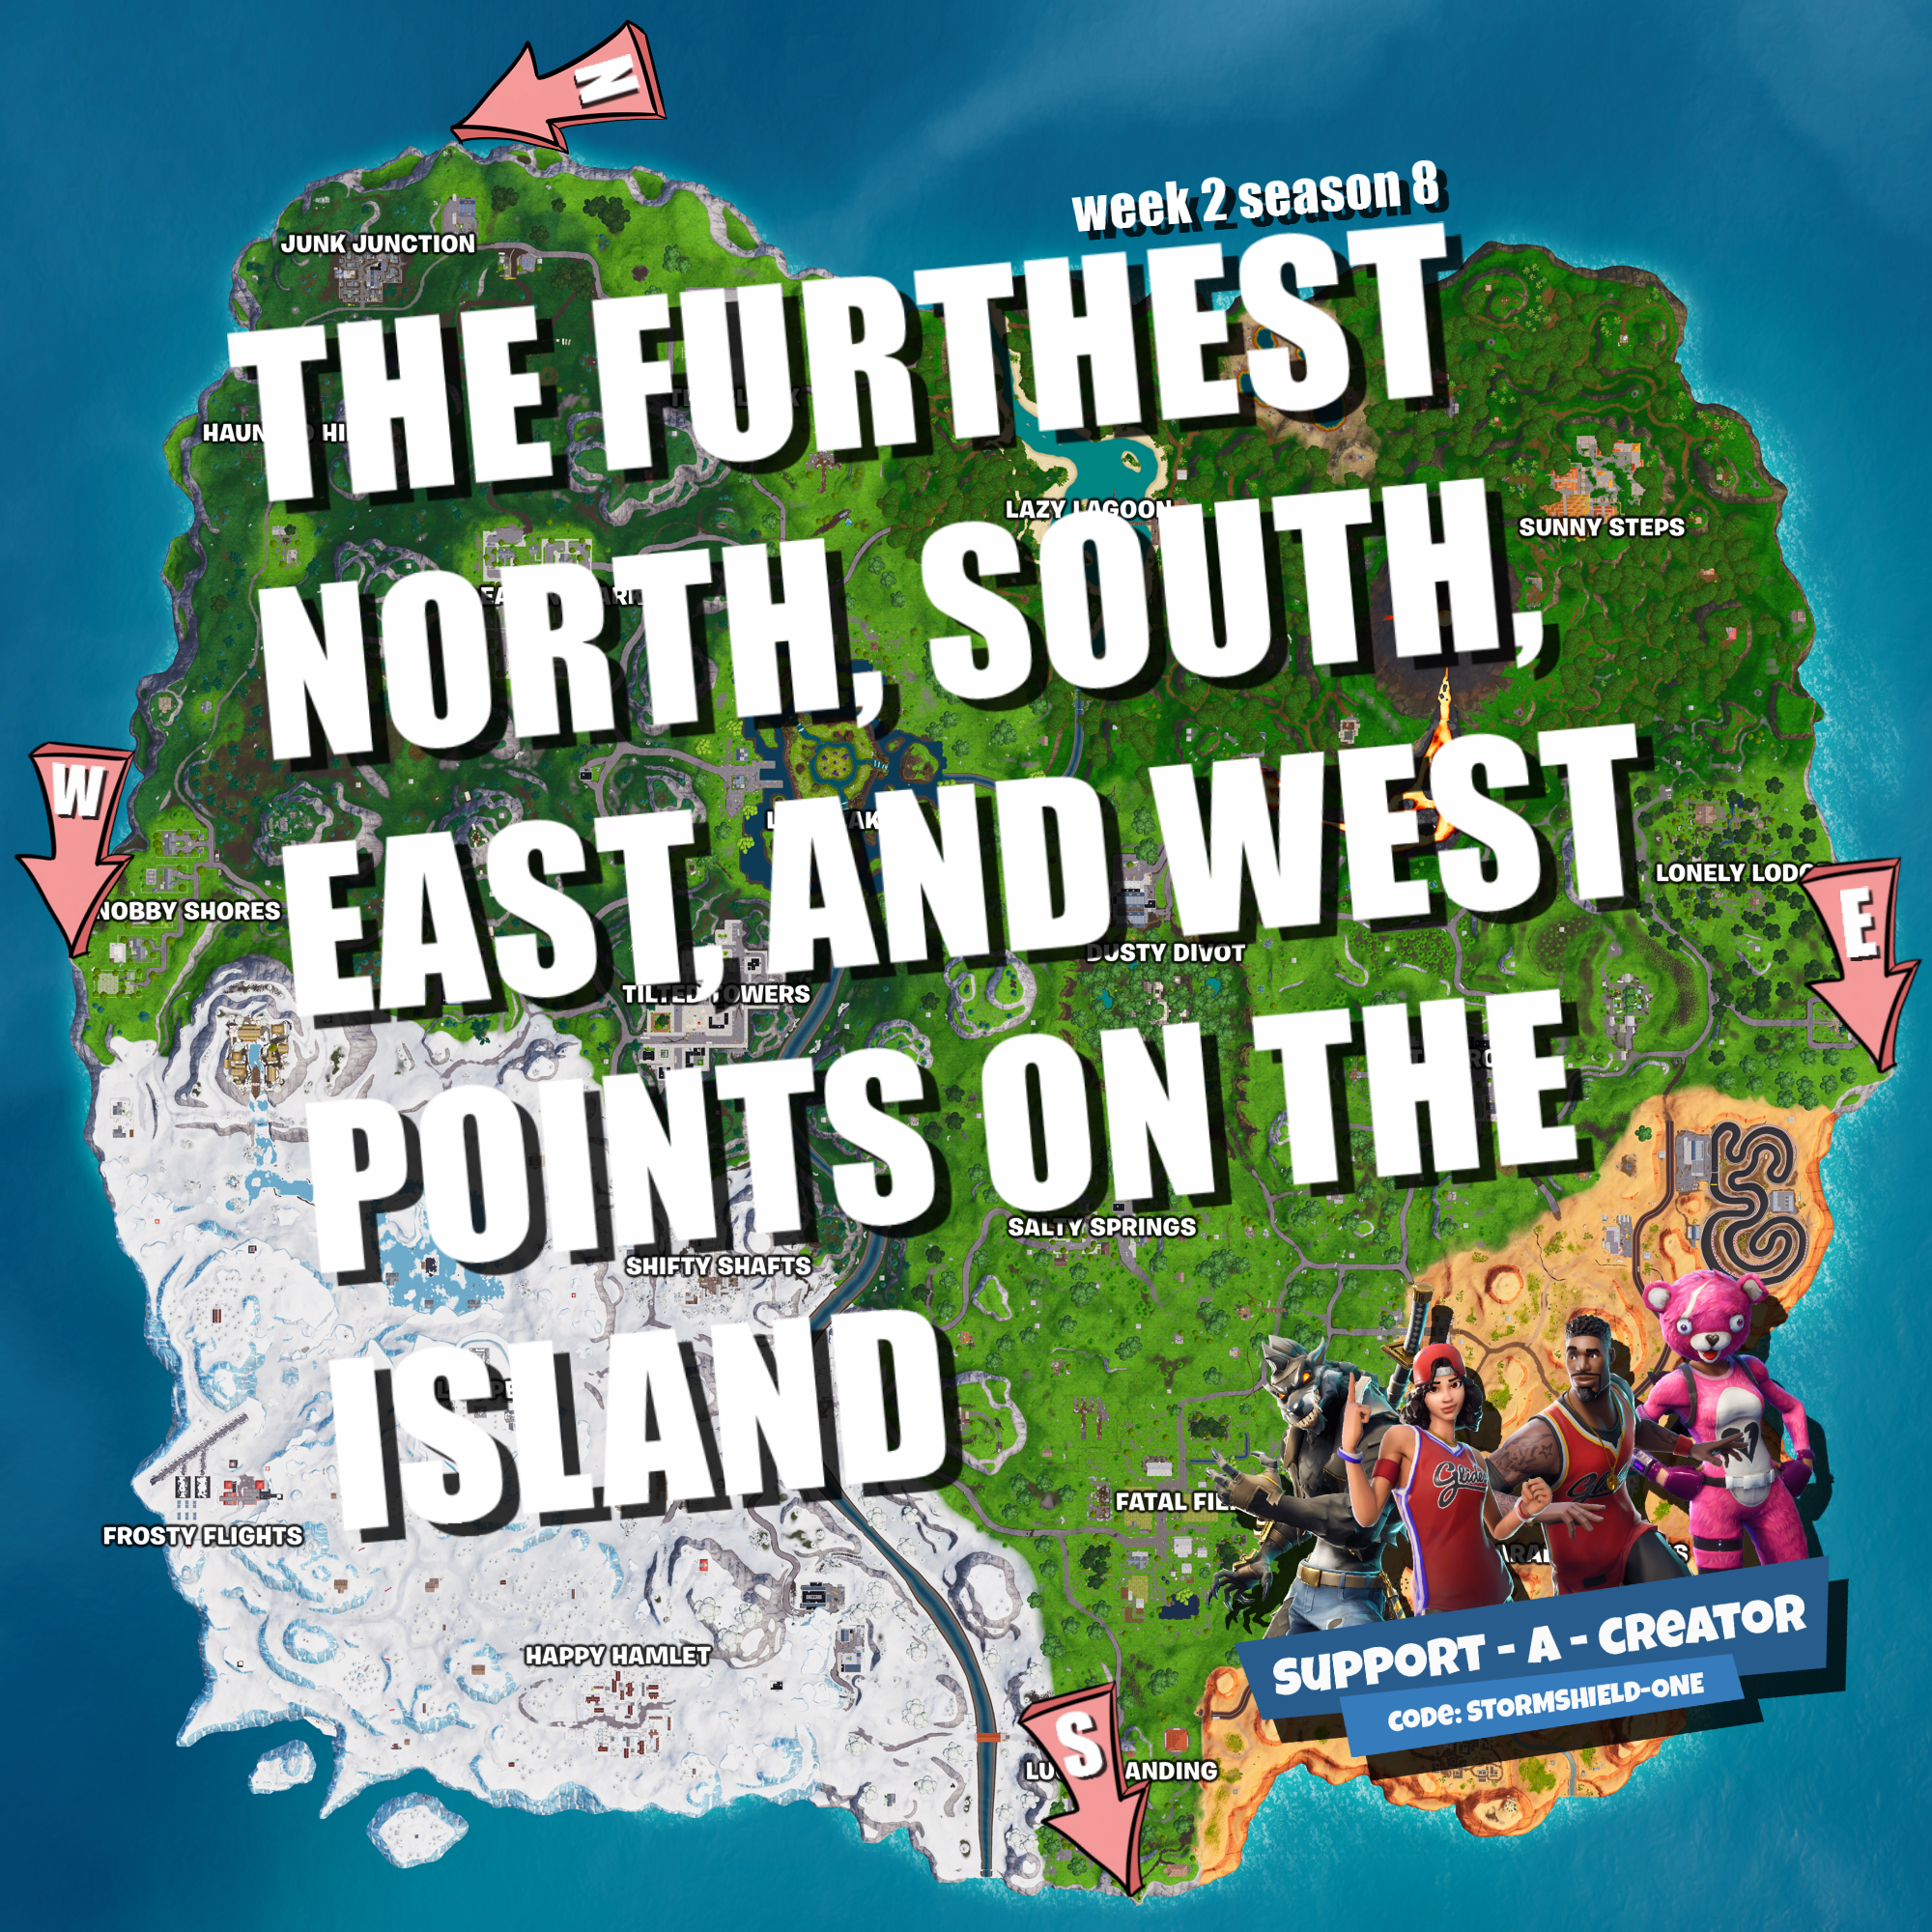 Visit the furthest points of the island fortnite